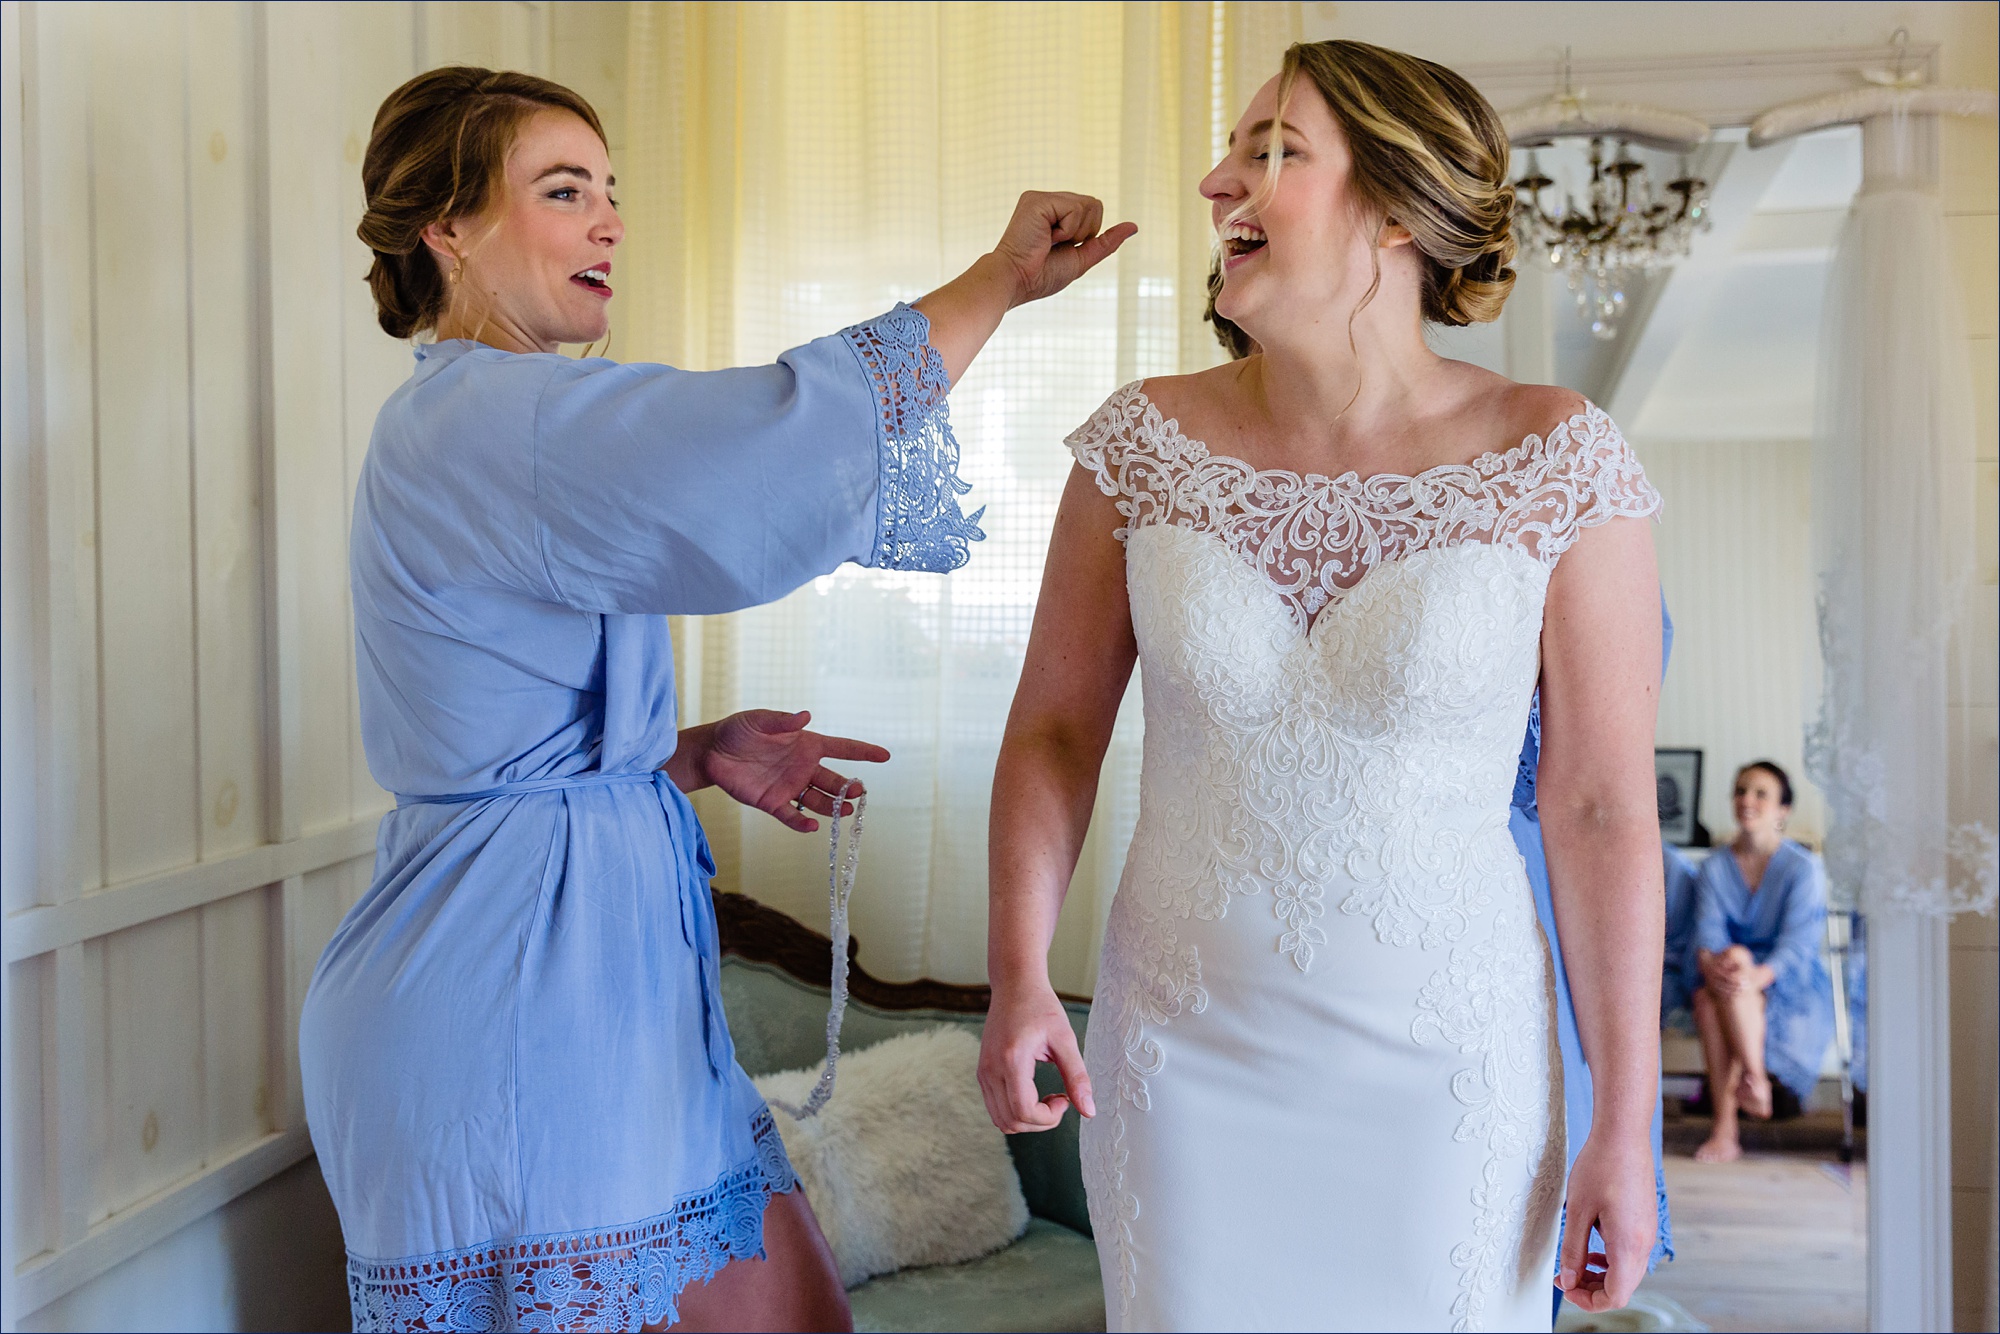 A bridesmaid plays around with the bride as she gets into her wedding gown at The Preserve in NH